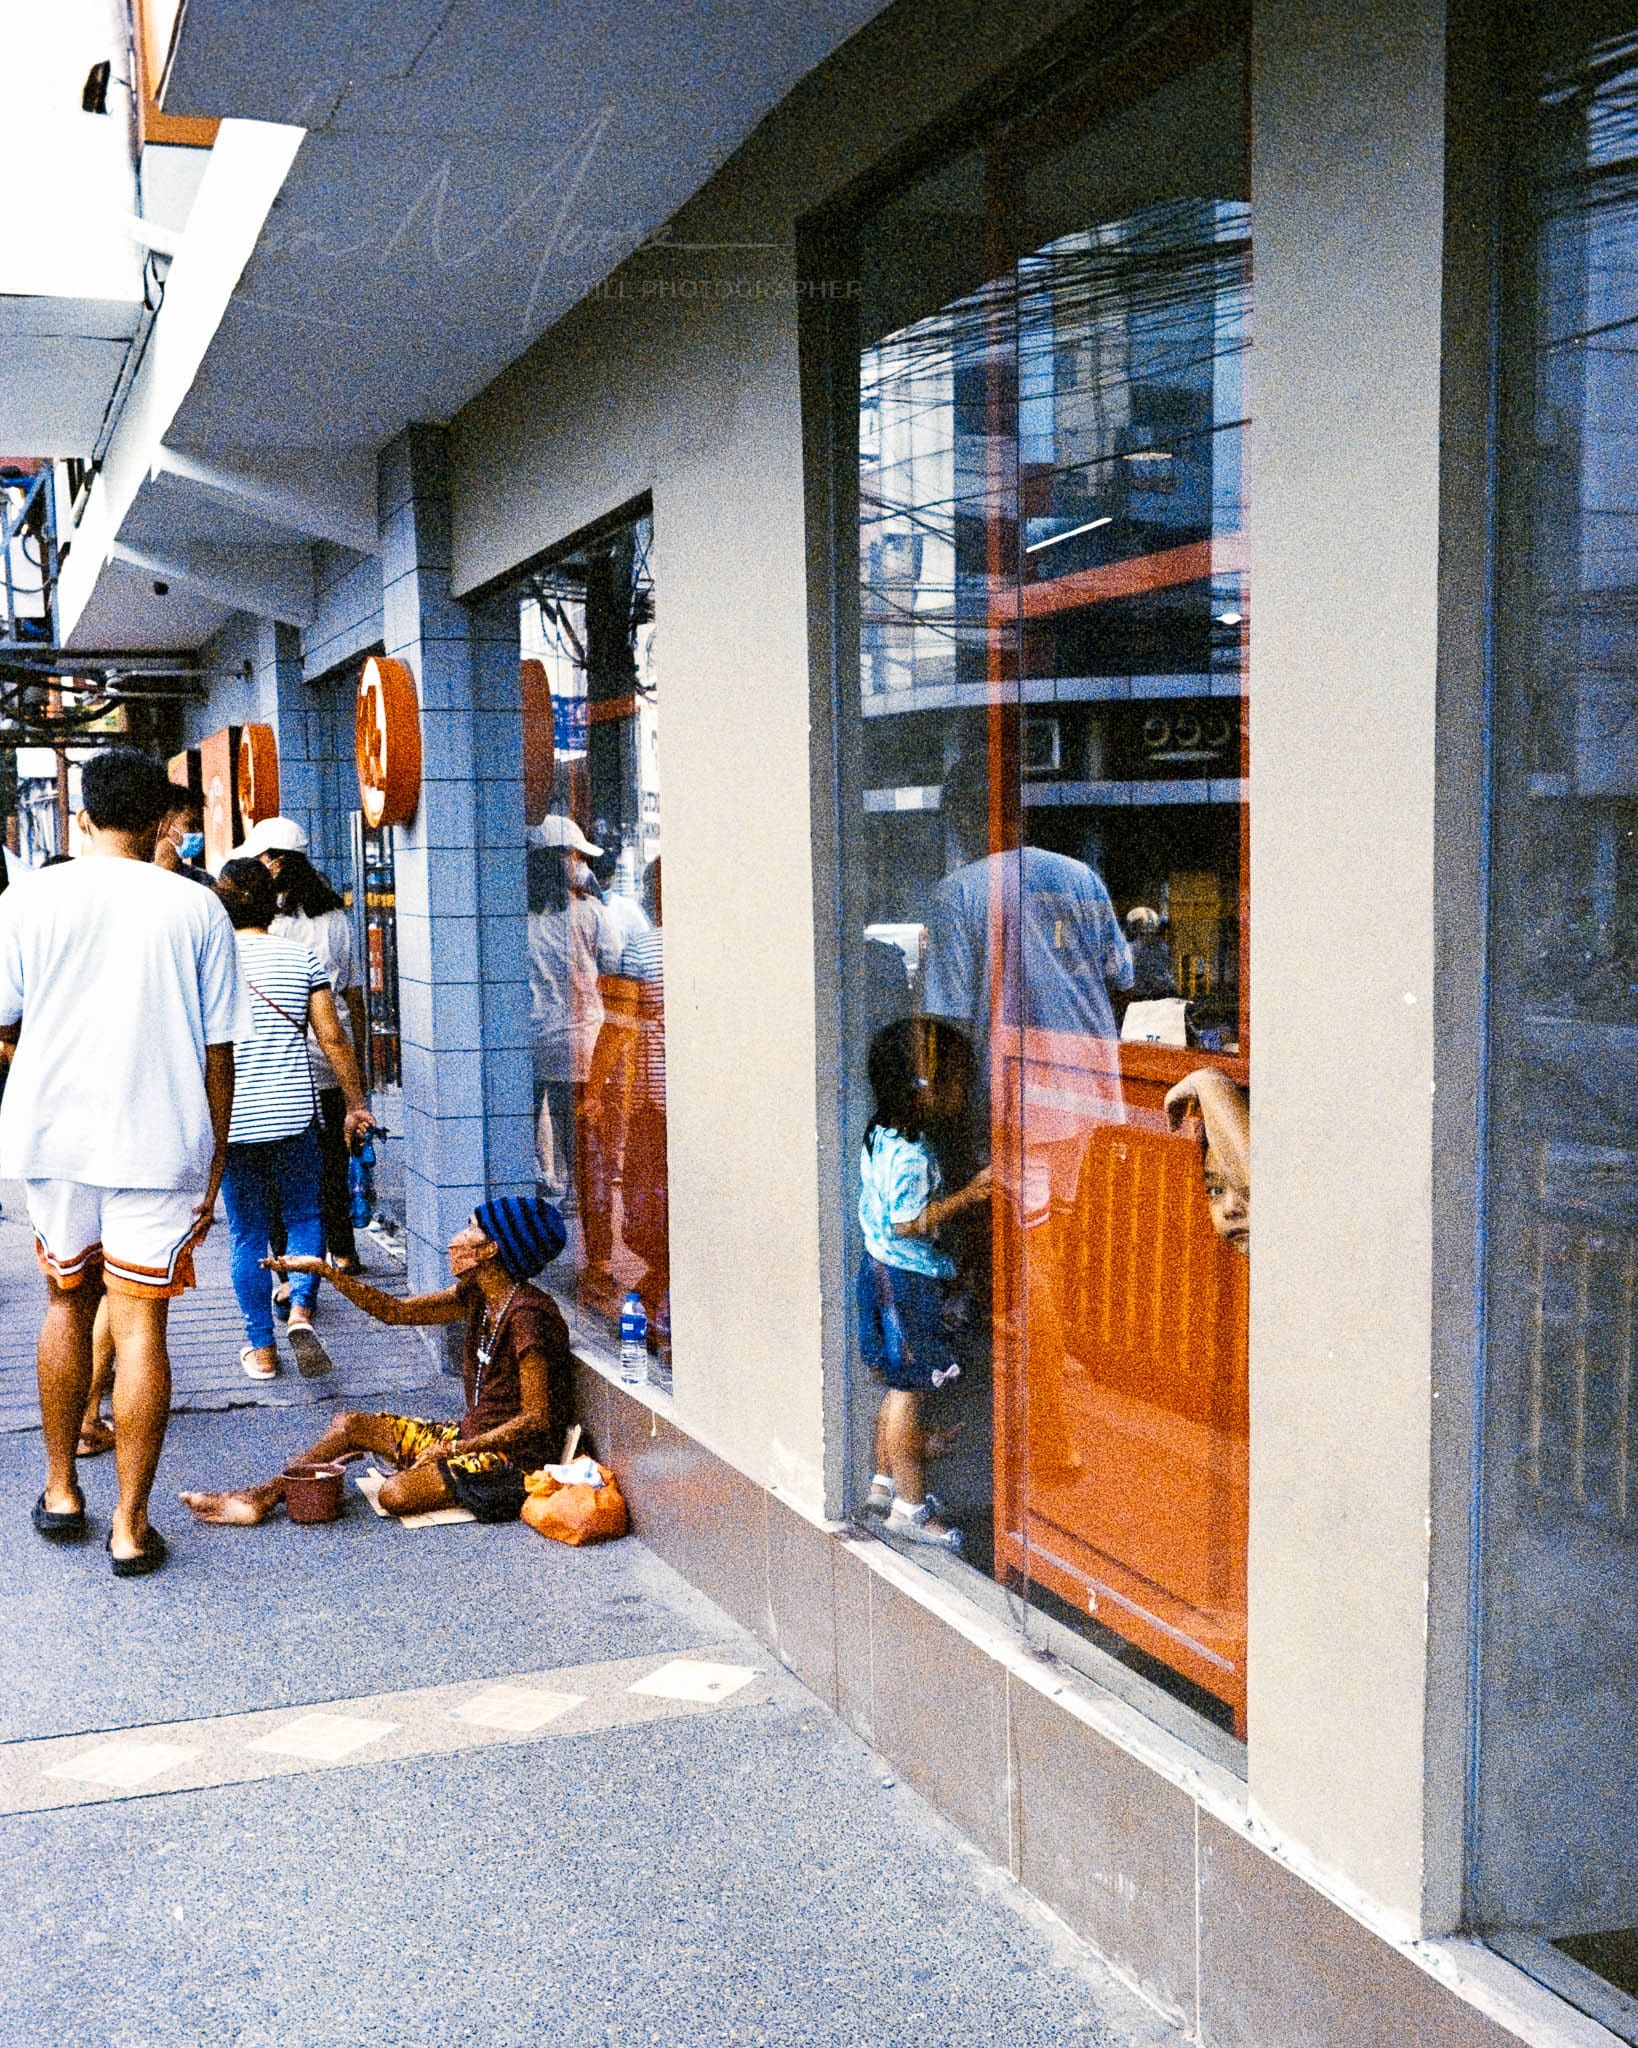 Busy urban scene depicting contrast between retail bustle and visible poverty on the sidewalk.